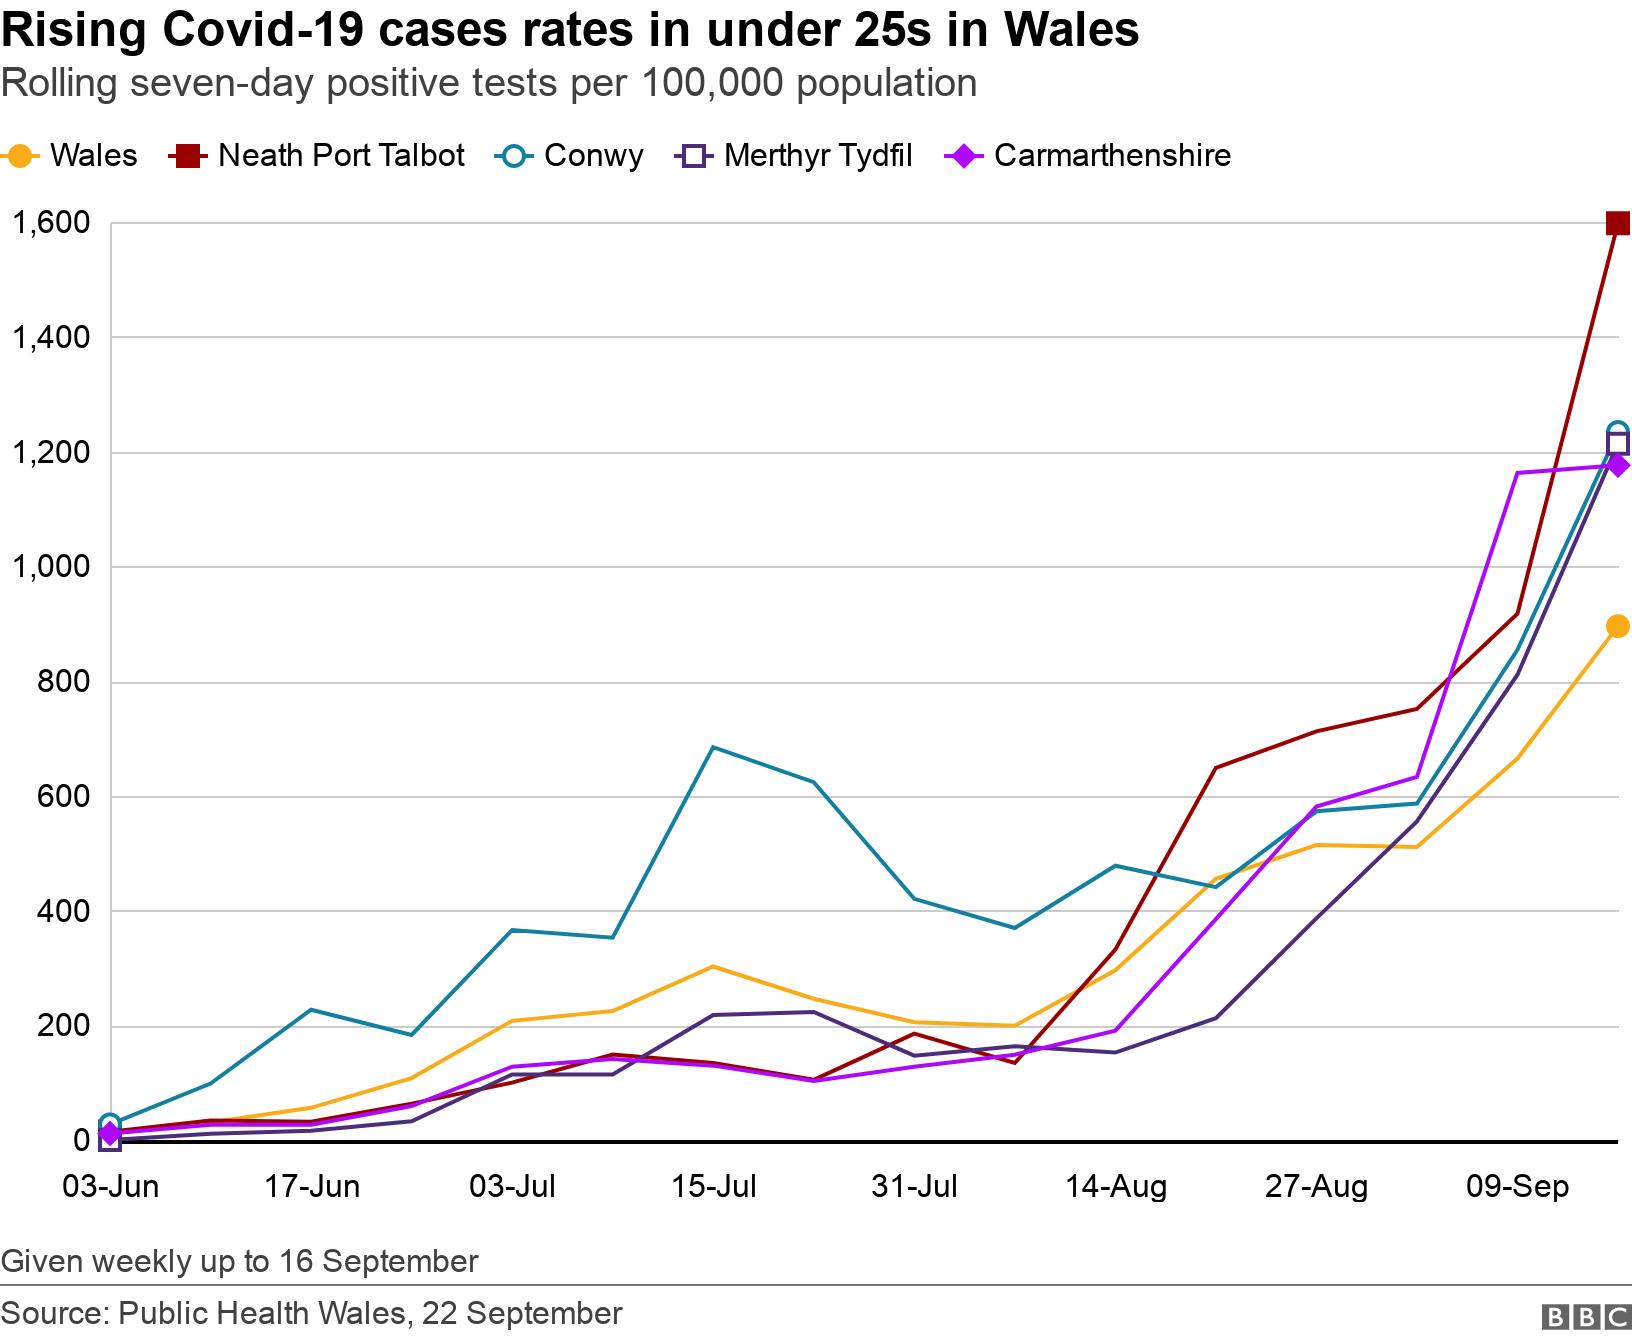 Rising Covid-19 cases rates in under 25s in Wales. Rolling seven-day positive tests per 100,000 population.  Given weekly up to 16 September.